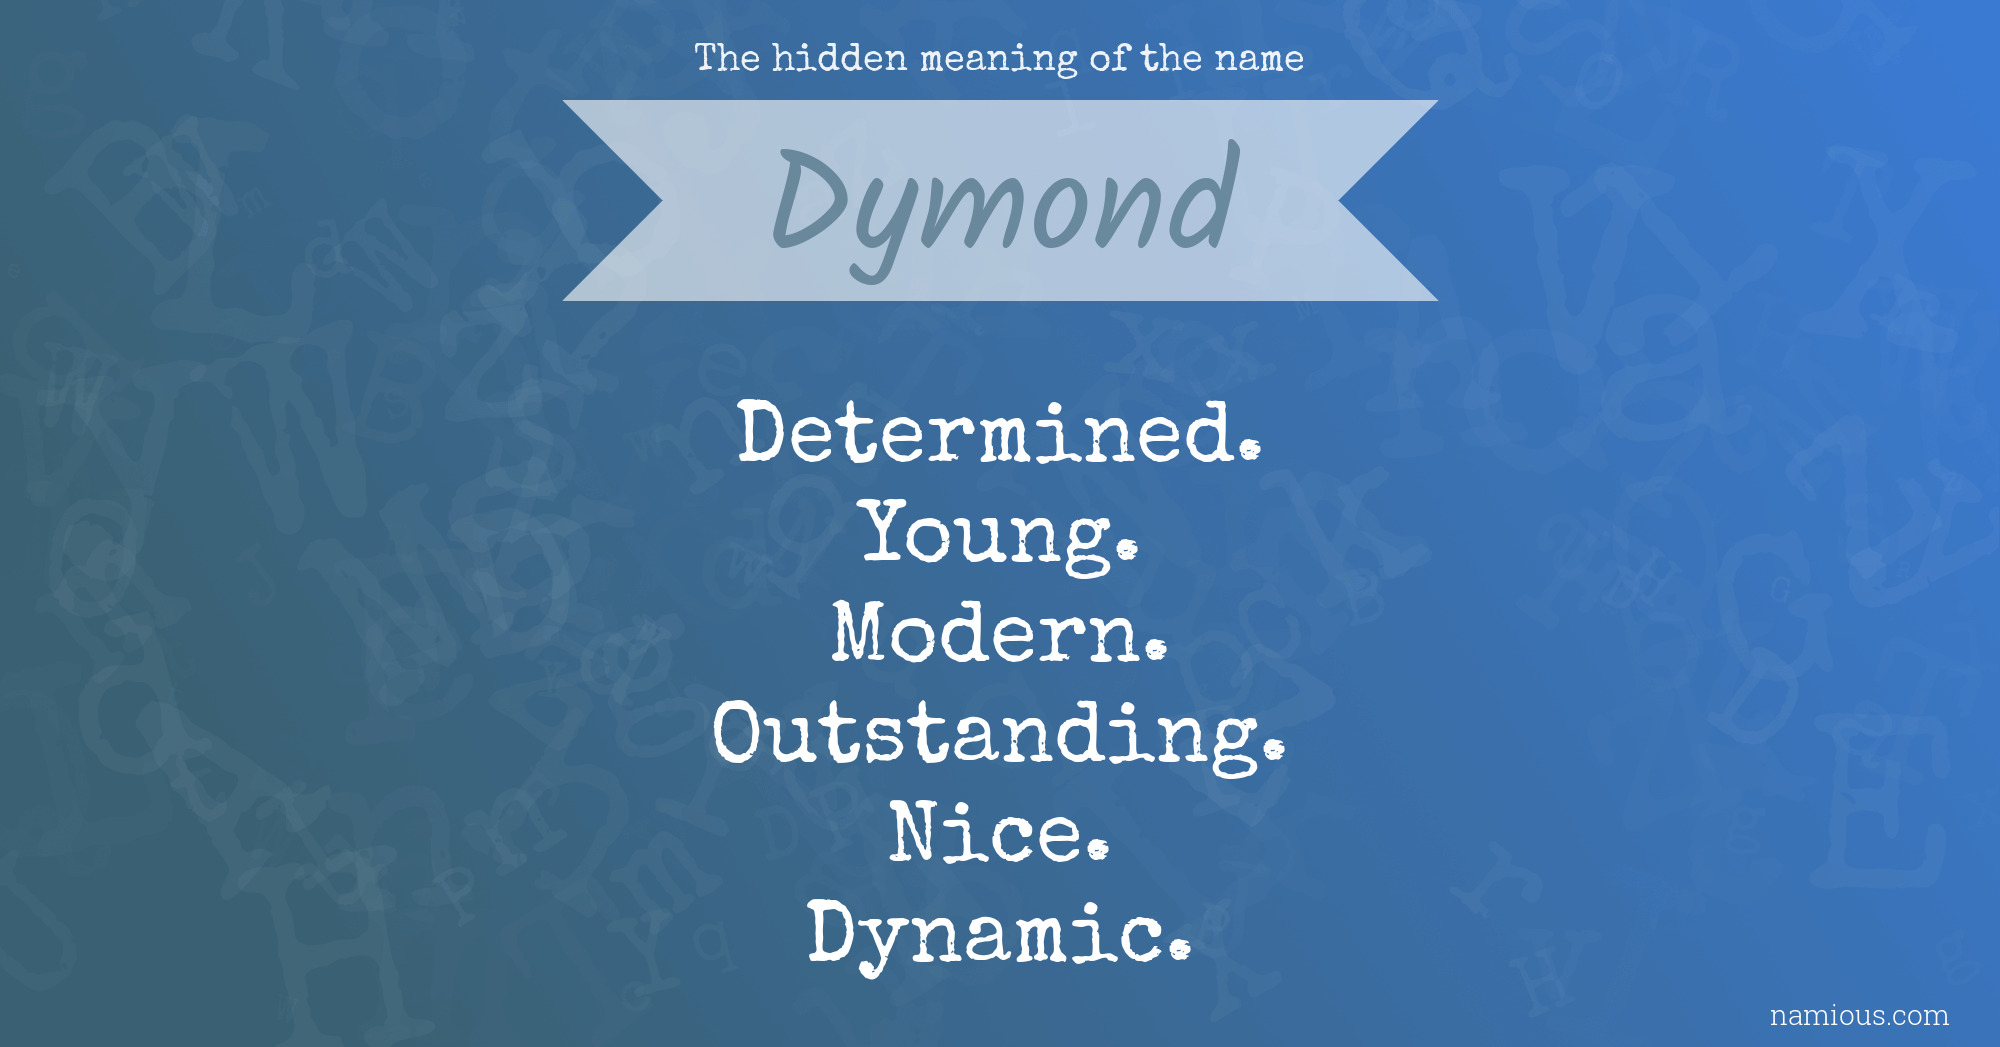 The hidden meaning of the name Dymond